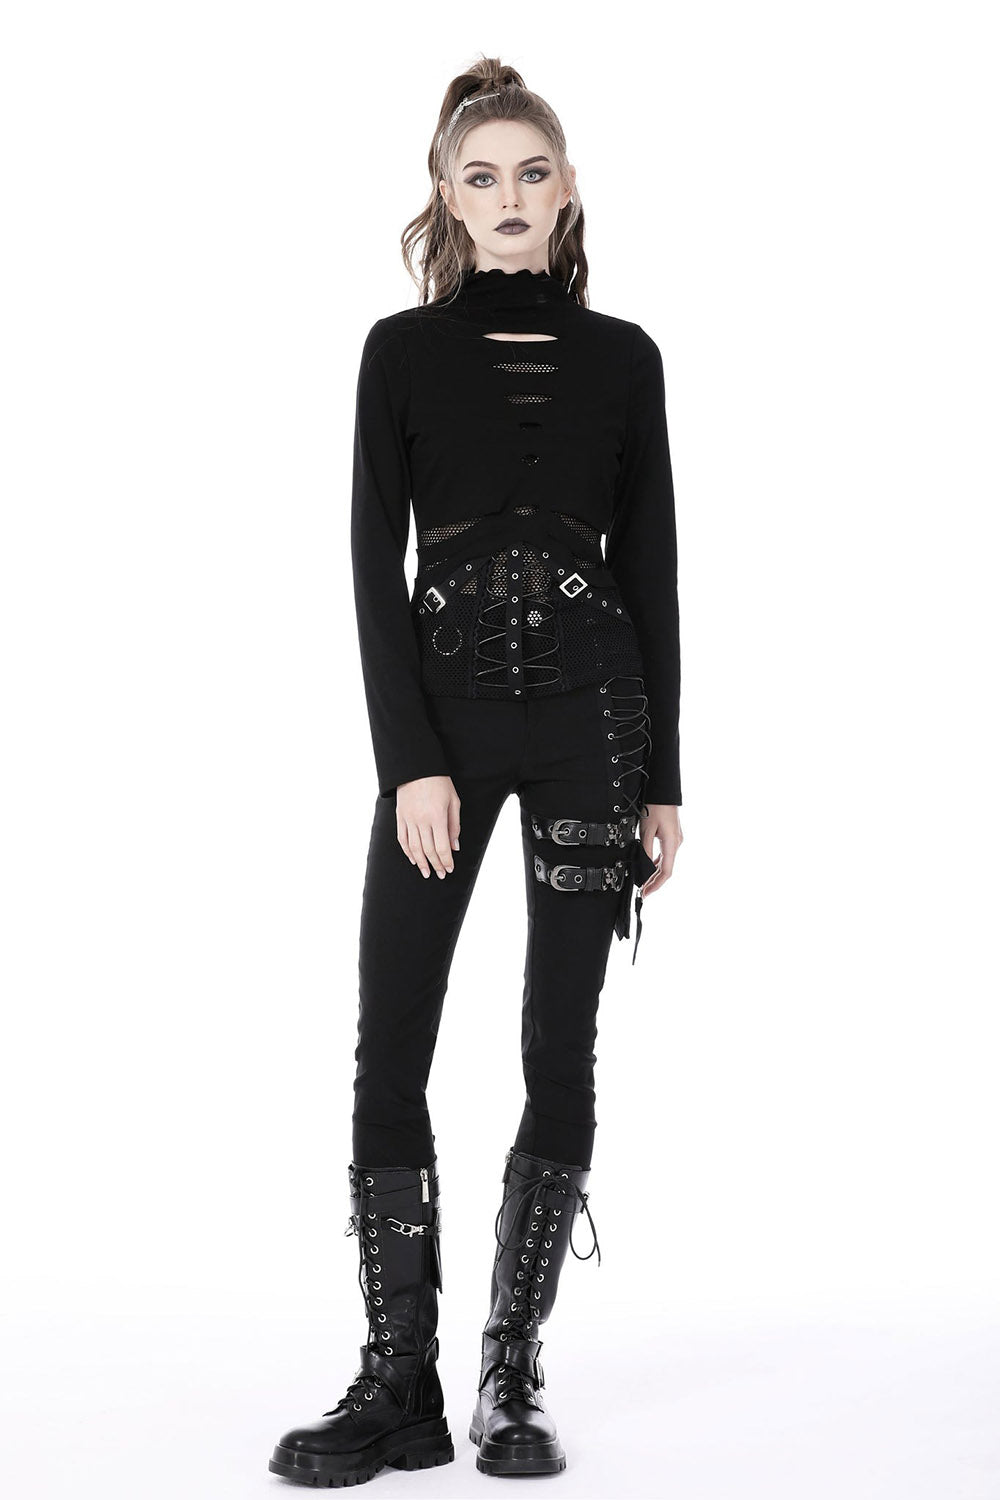 gothic streetstyle top for women